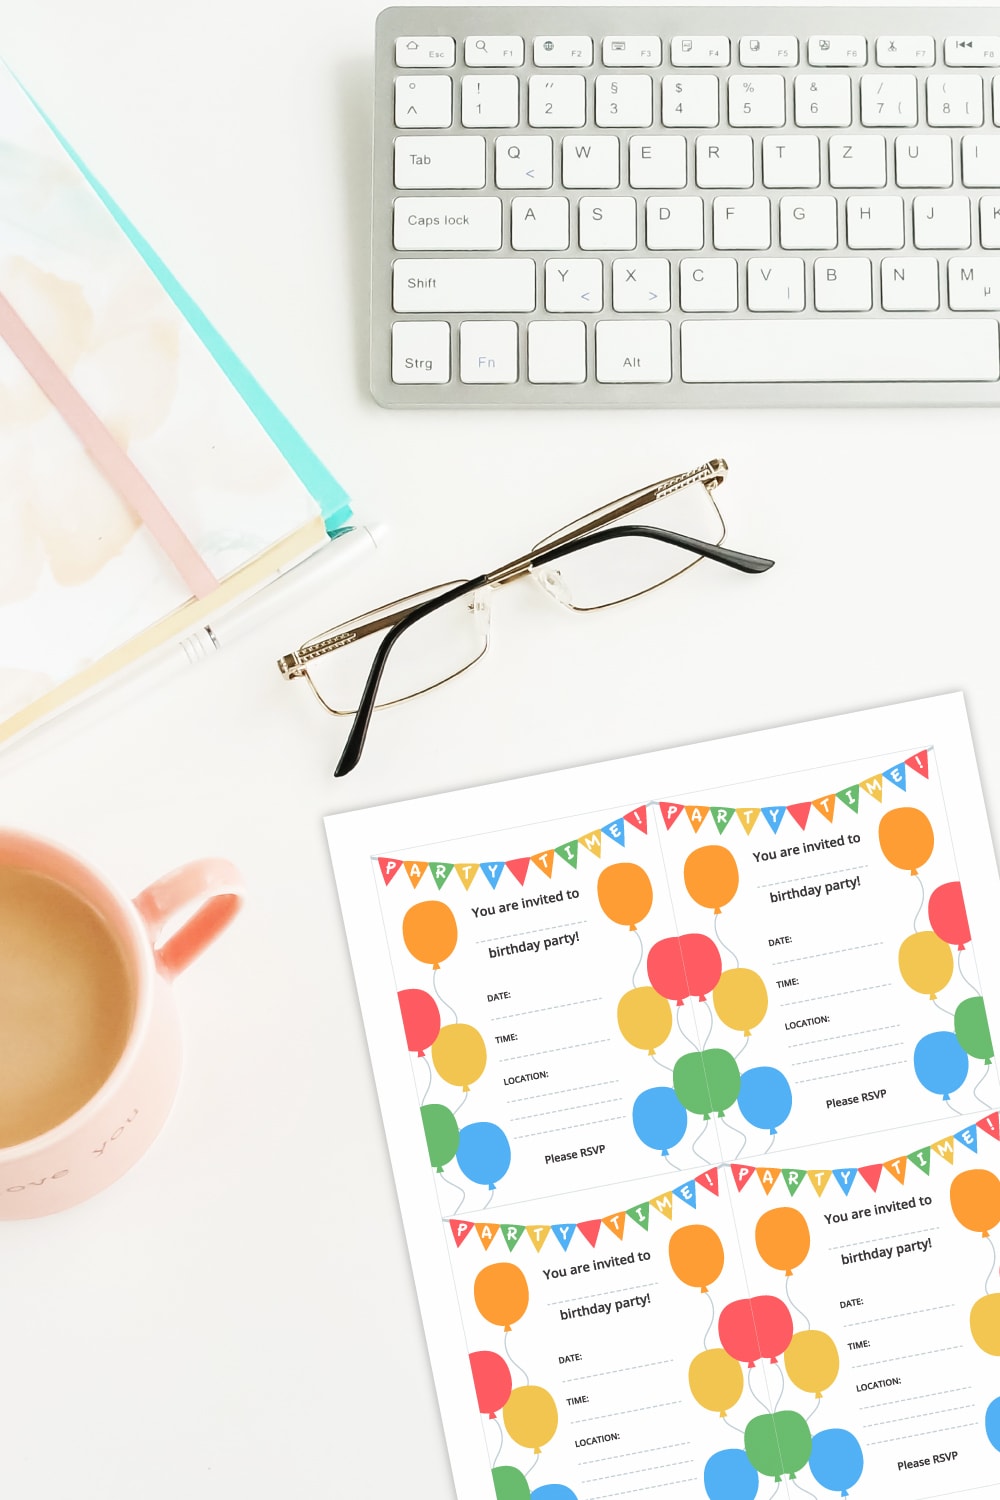 Preview of birthday party invite printable page on white desk with keyboard on top edge, stationery items, glasses and partial view of coffee mug on the left side. 